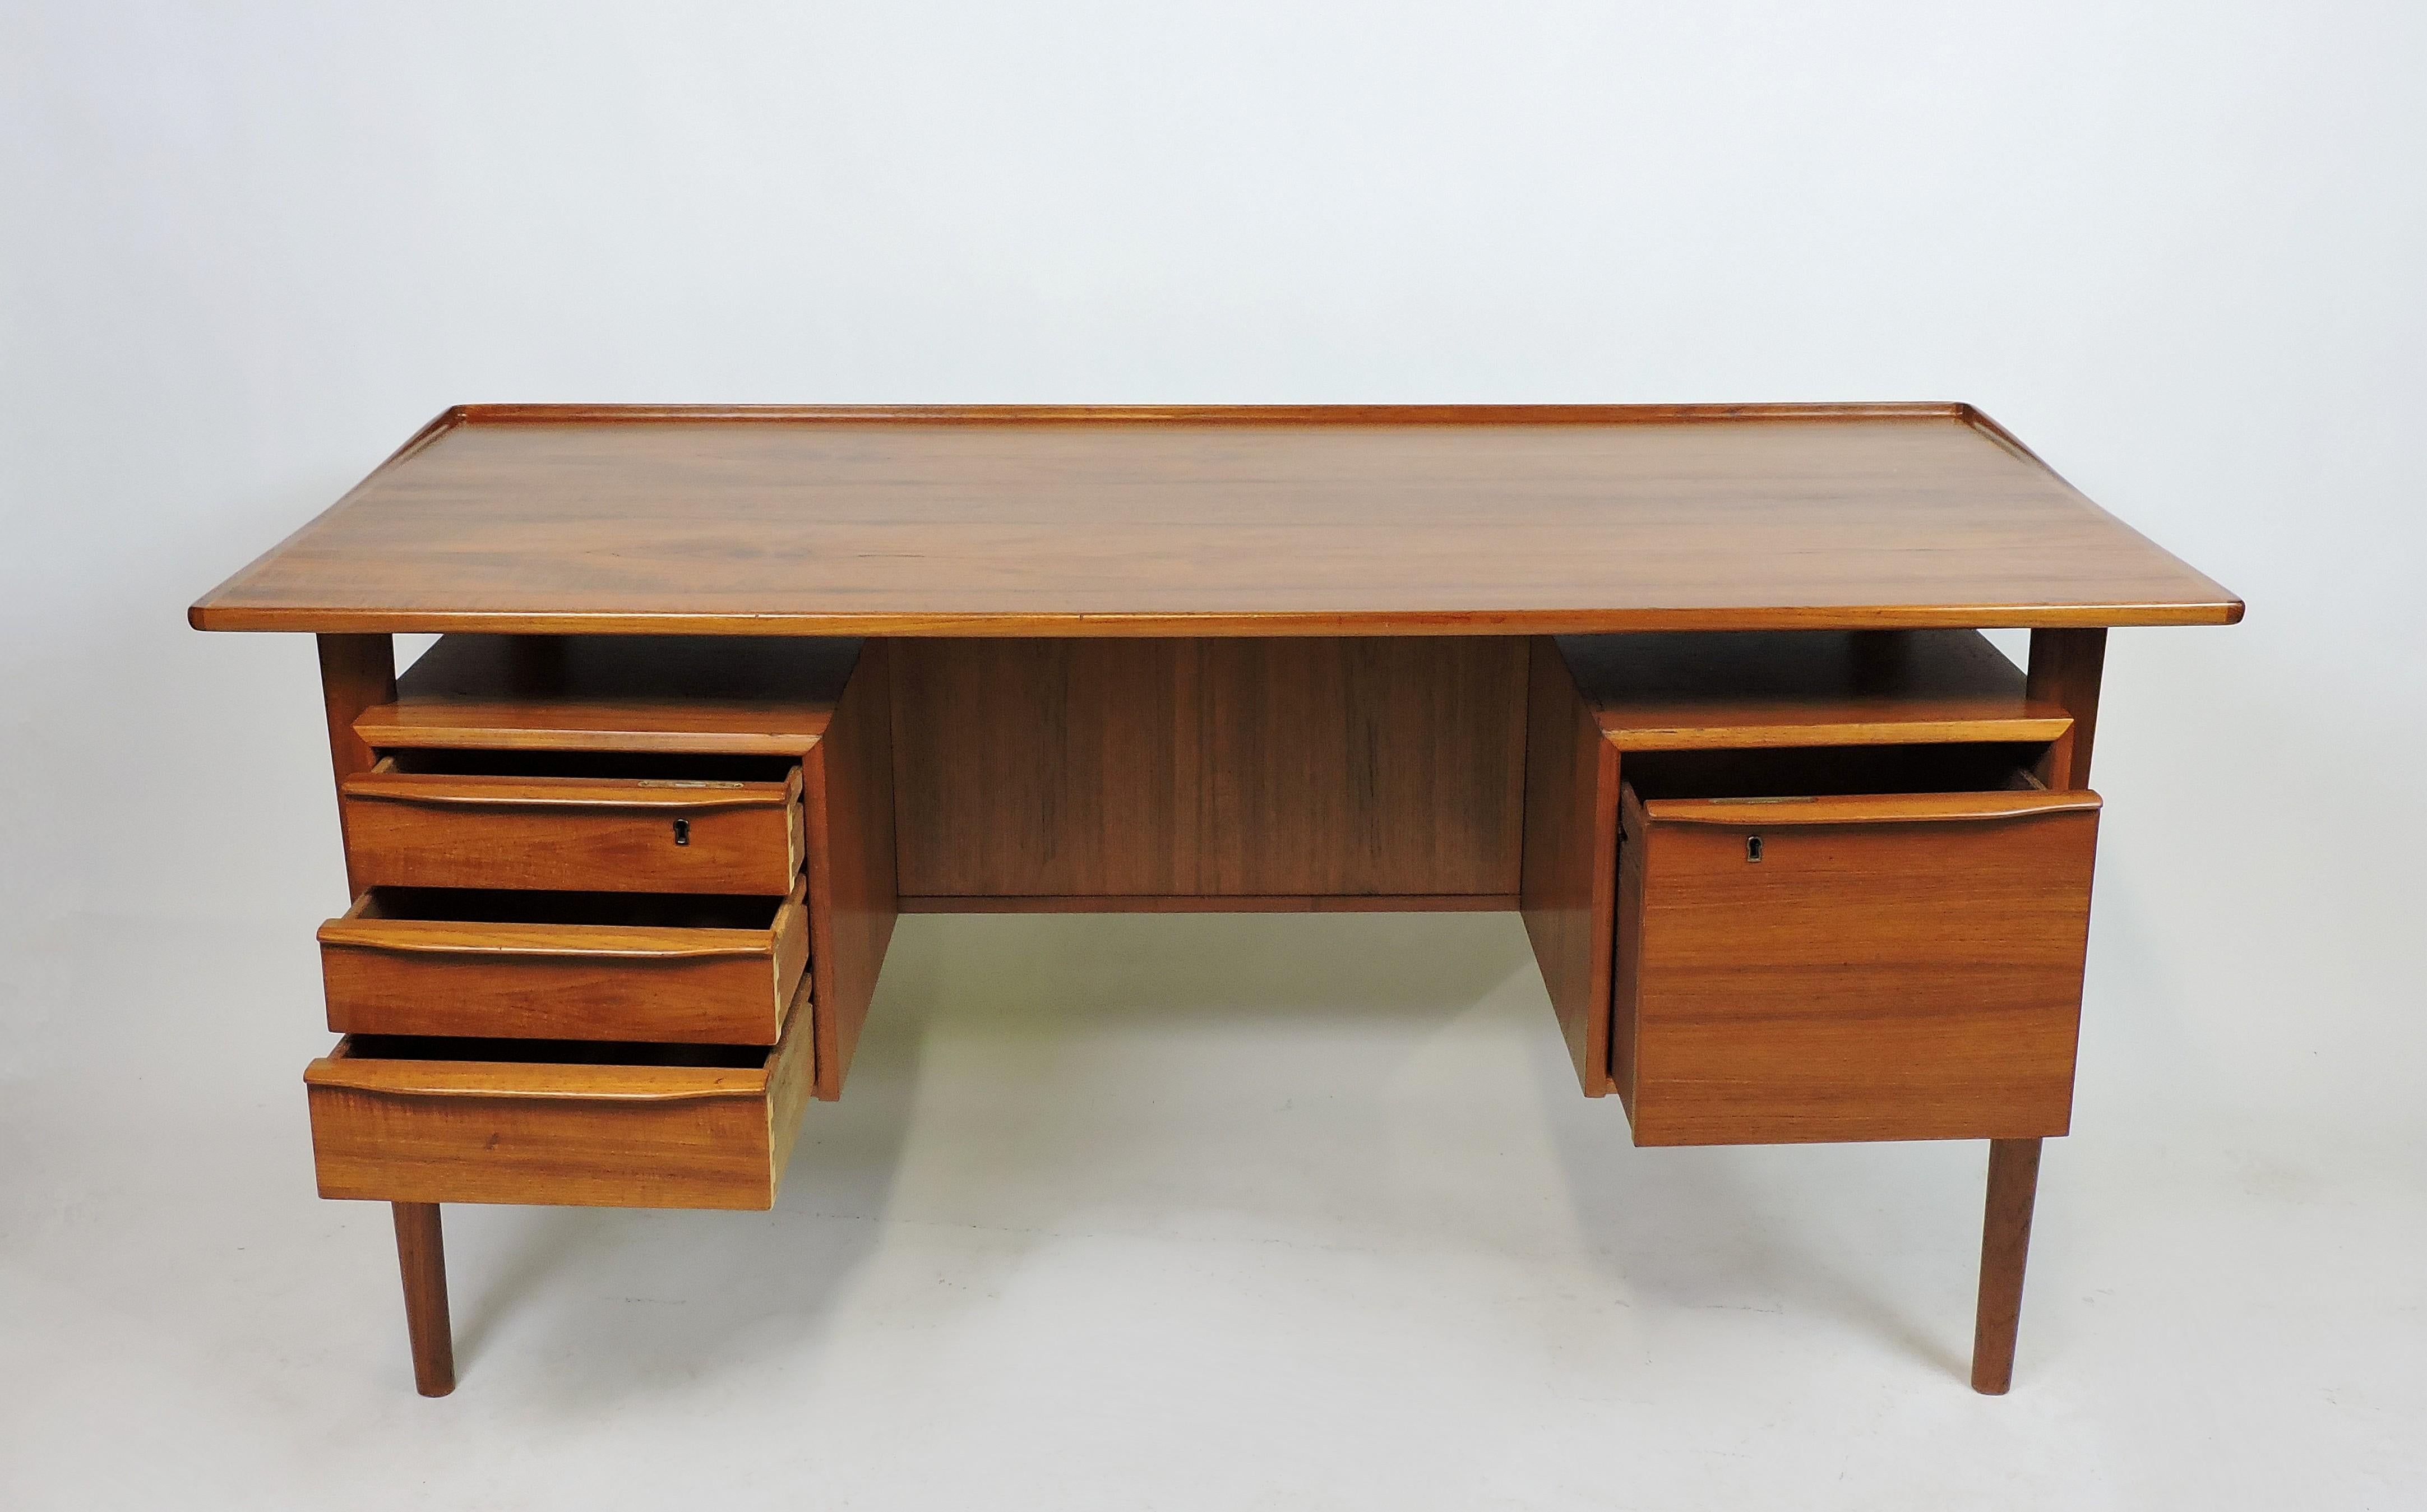 Handsome freestanding teak desk designed by Peter Løvig Nielsen and made in Denmark. This desk has a generously sized floating top, three drawers including one that locks, a file cabinet that also locks, and two storage compartments with a shelf in